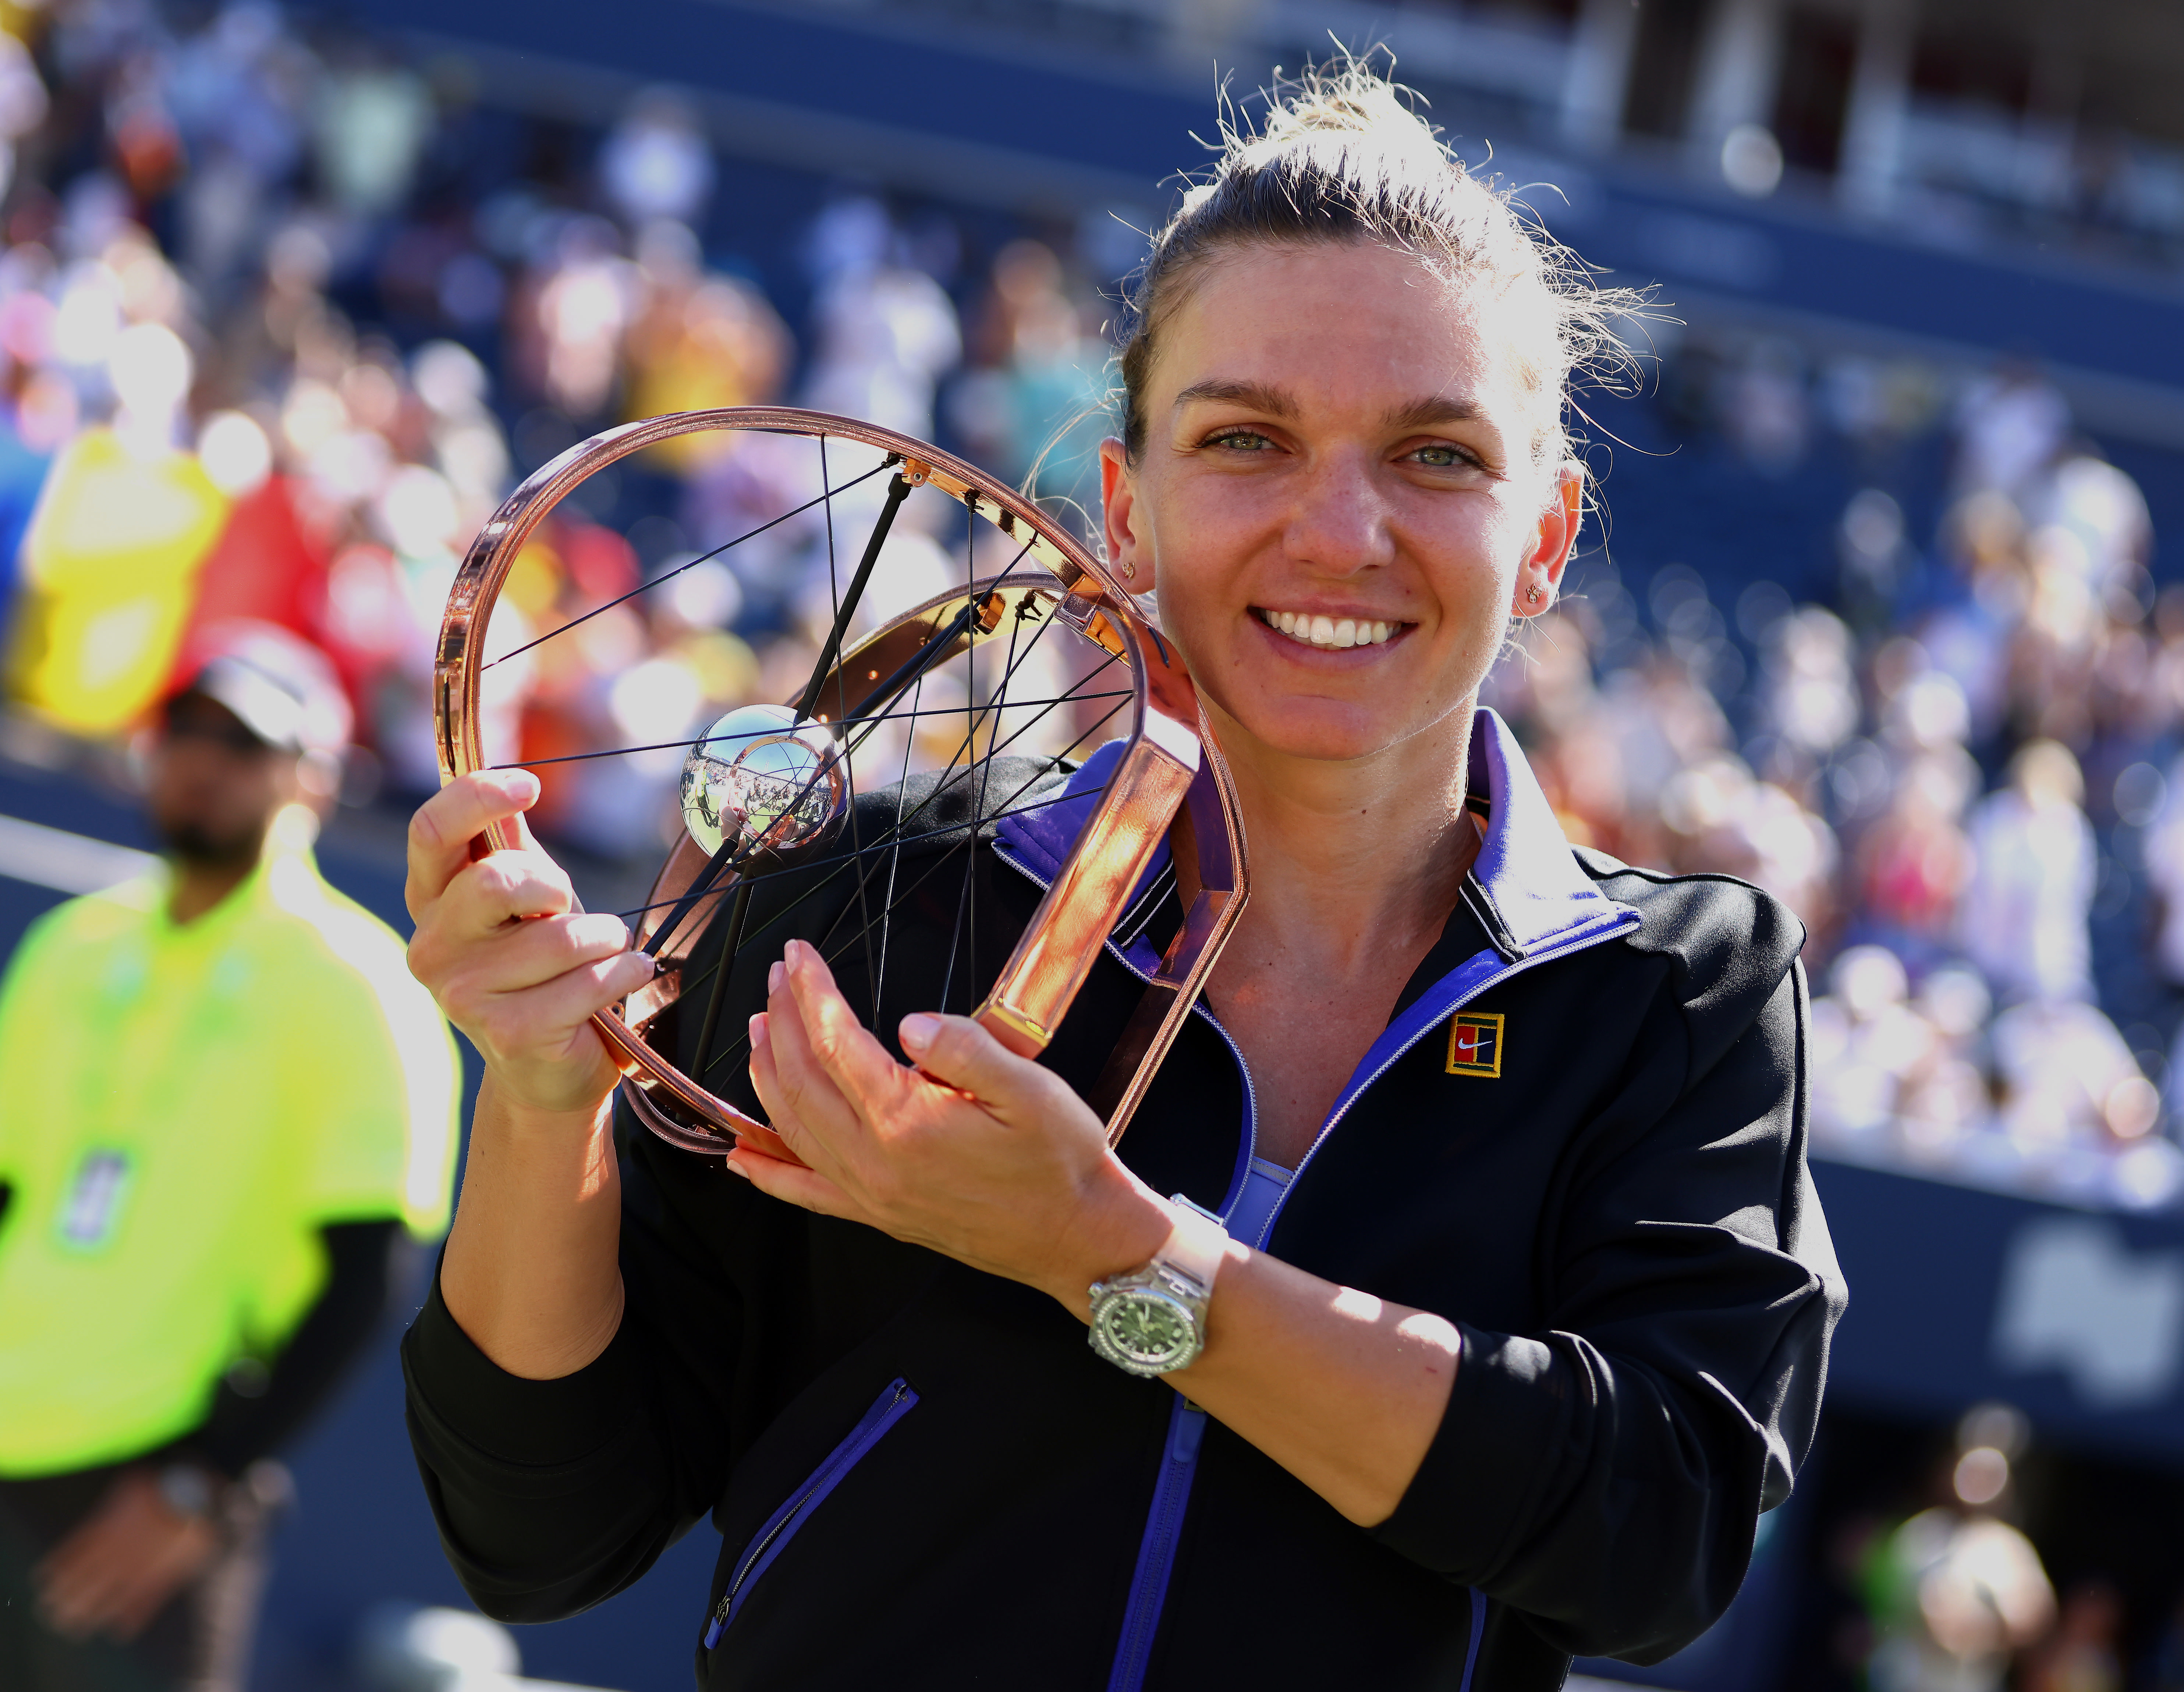 Simona Halep after winning Toronto “Im just dreaming for more”